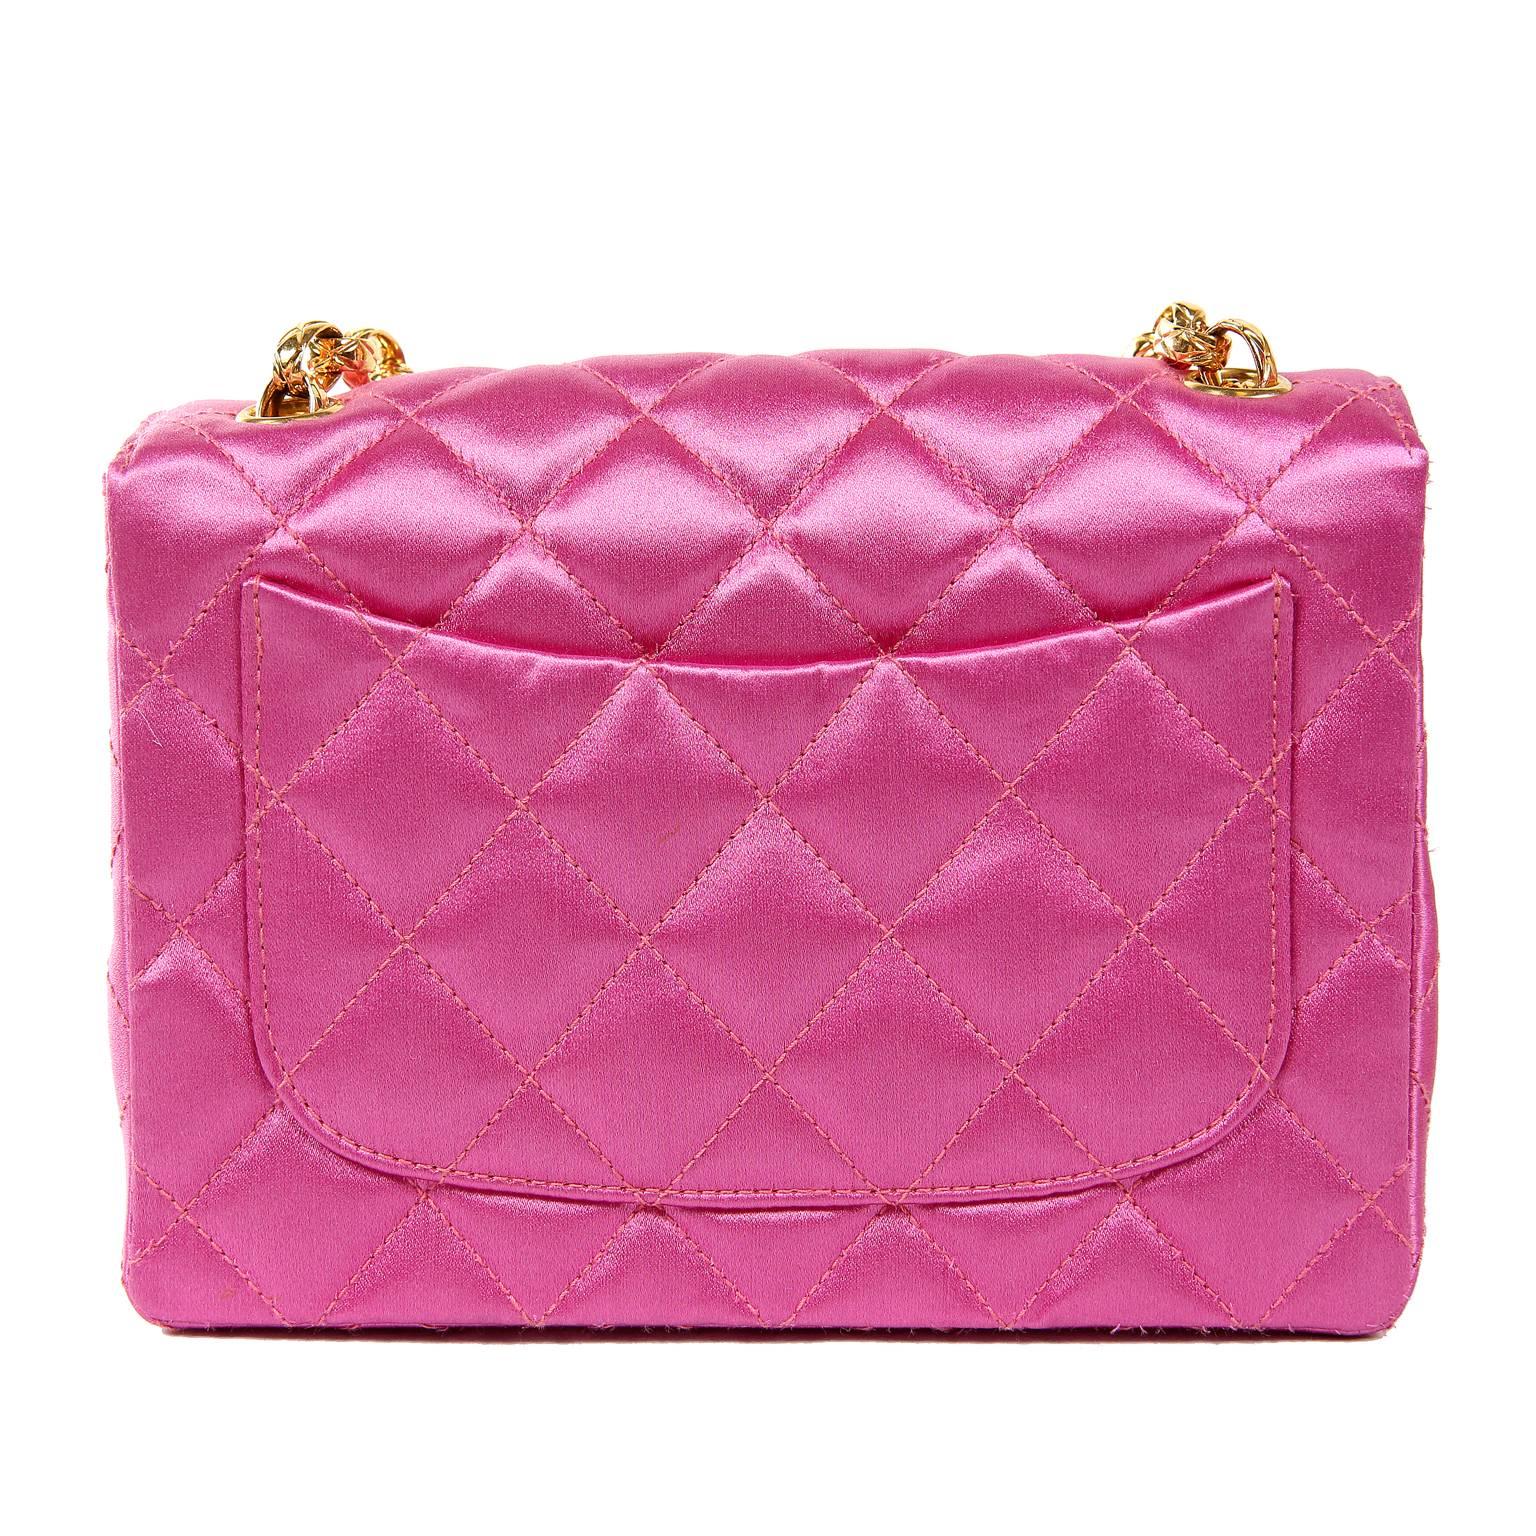 Chanel Fuchsia Satin Mini Classic Bag- PRISTINE Condition
  Amazingly preserved from the early 1990’s, it appears never carried.  This classic design is a must have for any collection.   
Vivid hot pink satin is quilted in signature Chanel diamond